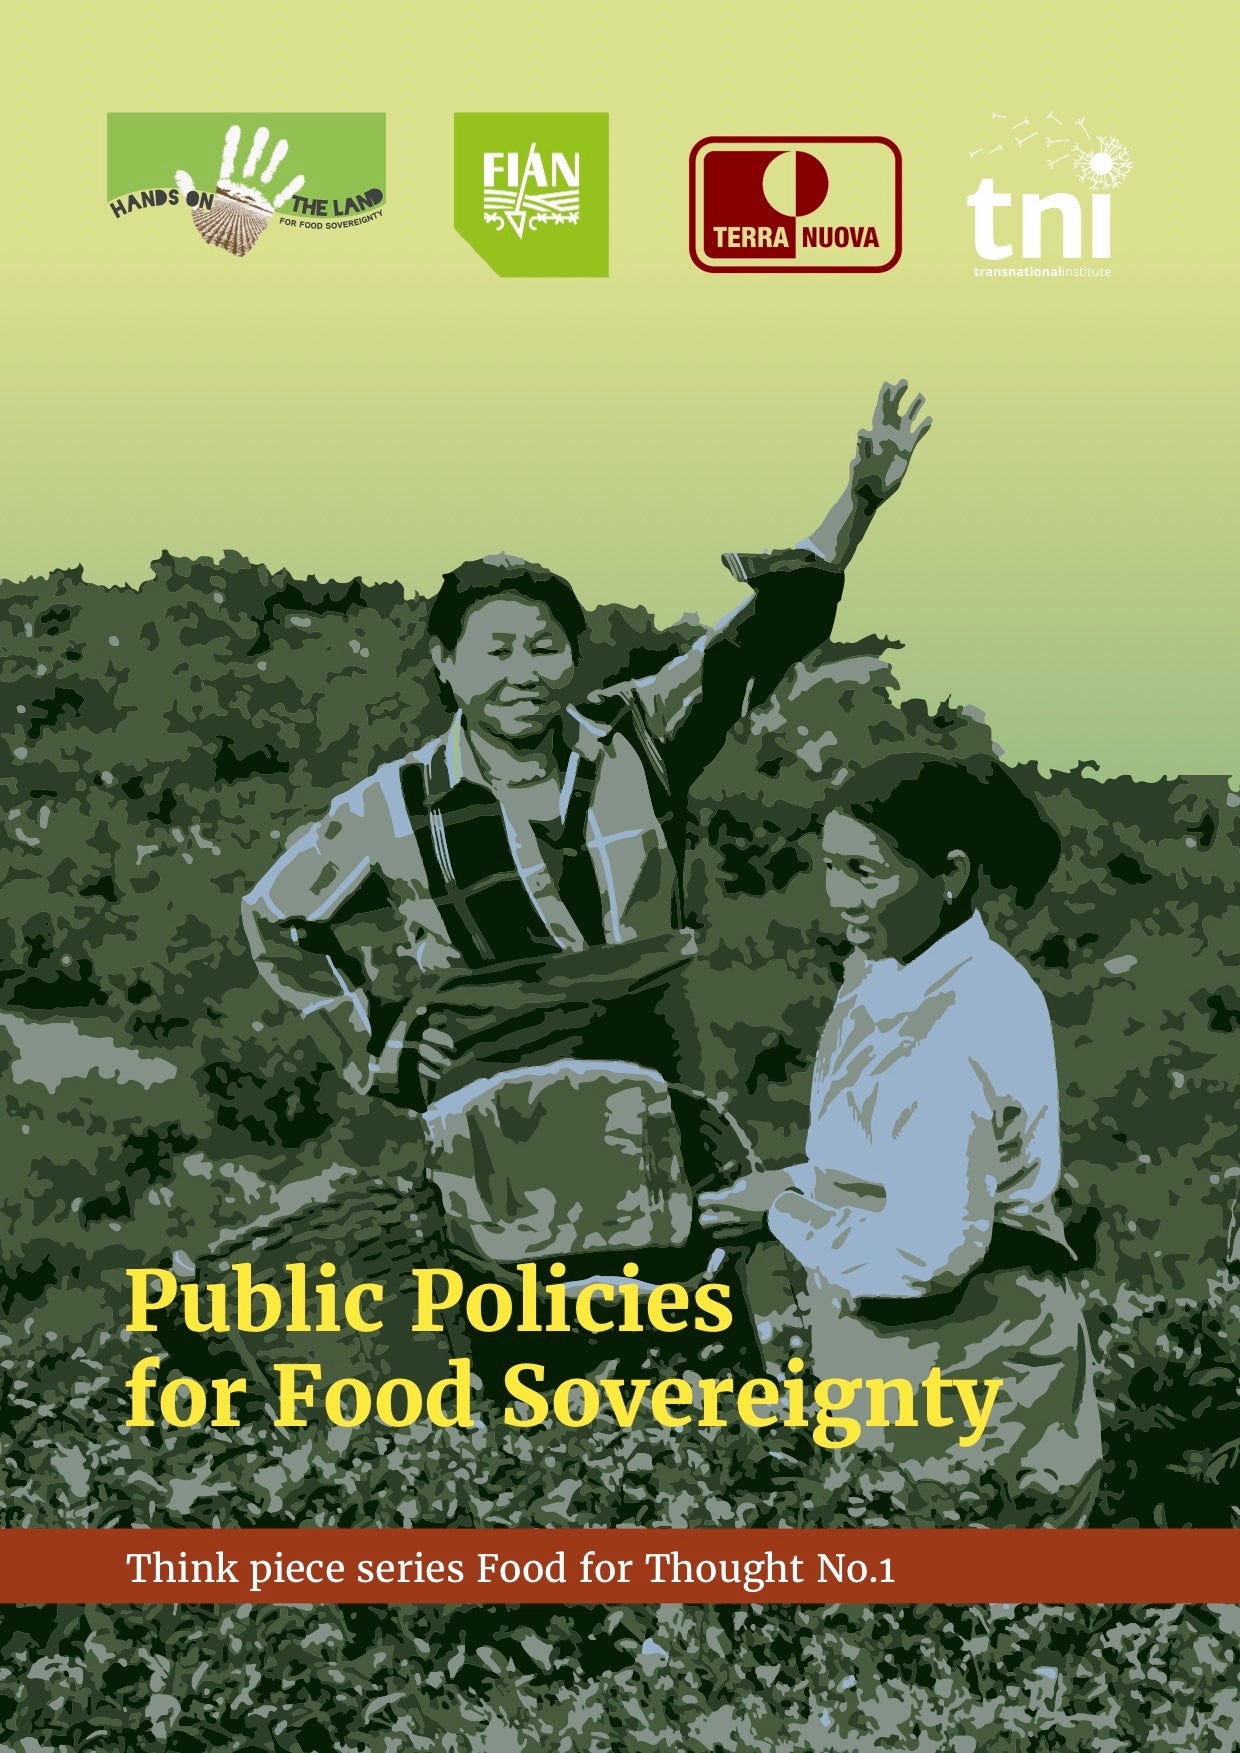 Public policies for food sovereignty